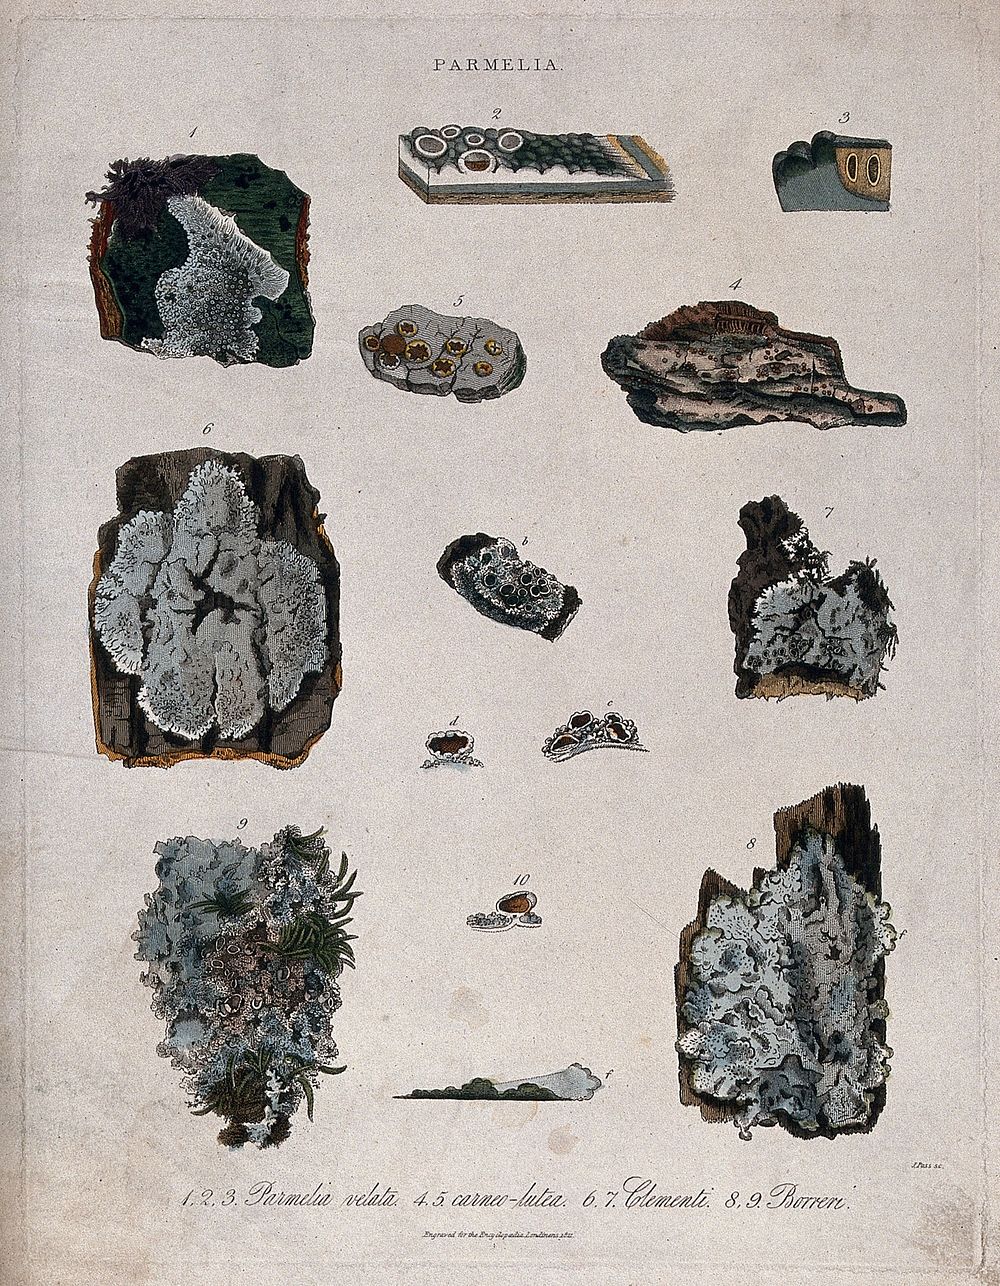 Four types of lichen (Parmelia species). Coloured engraving by J. Pass, c. 1821.